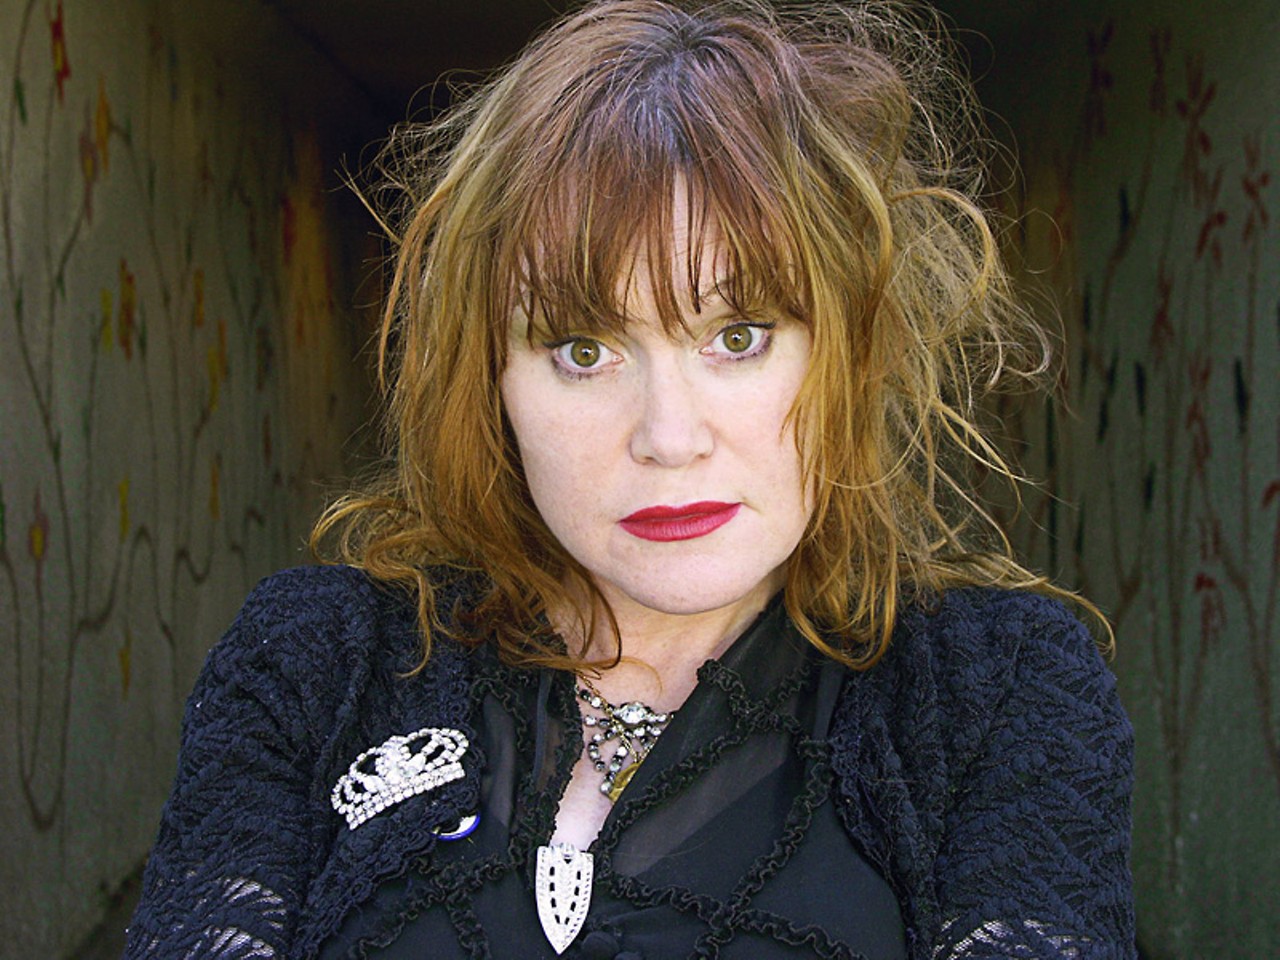 Please join me here at in wishing the one and only Exene Cervenka a very Happy Birthday today  